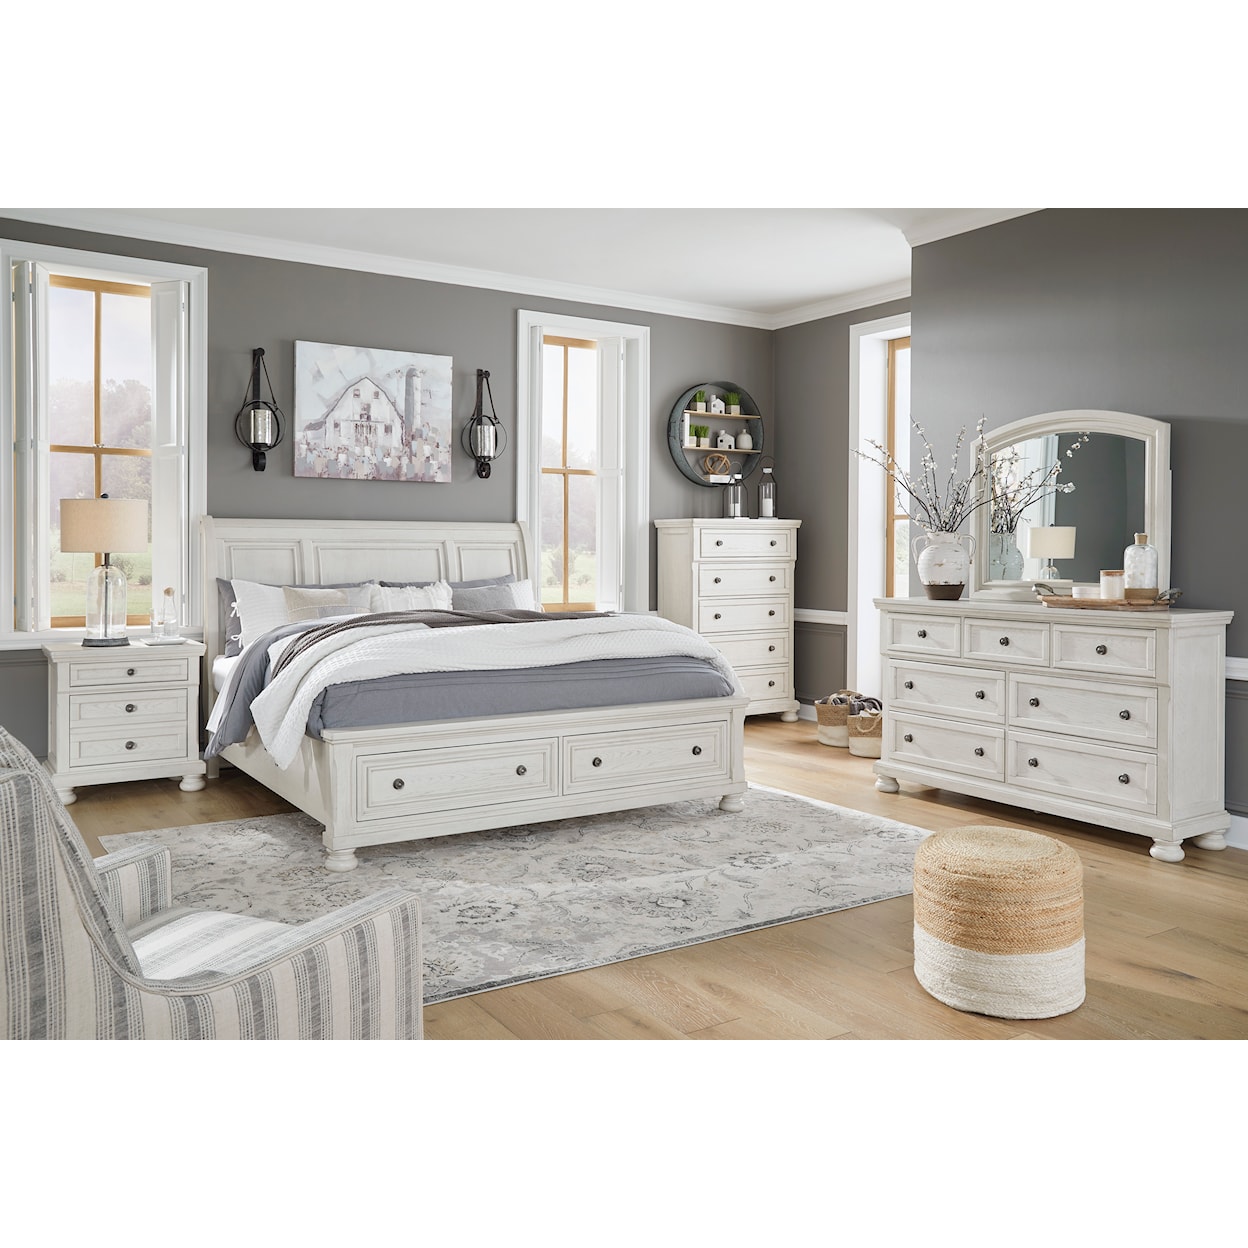 Signature Design by Ashley Robbinsdale Queen Bedroom Group